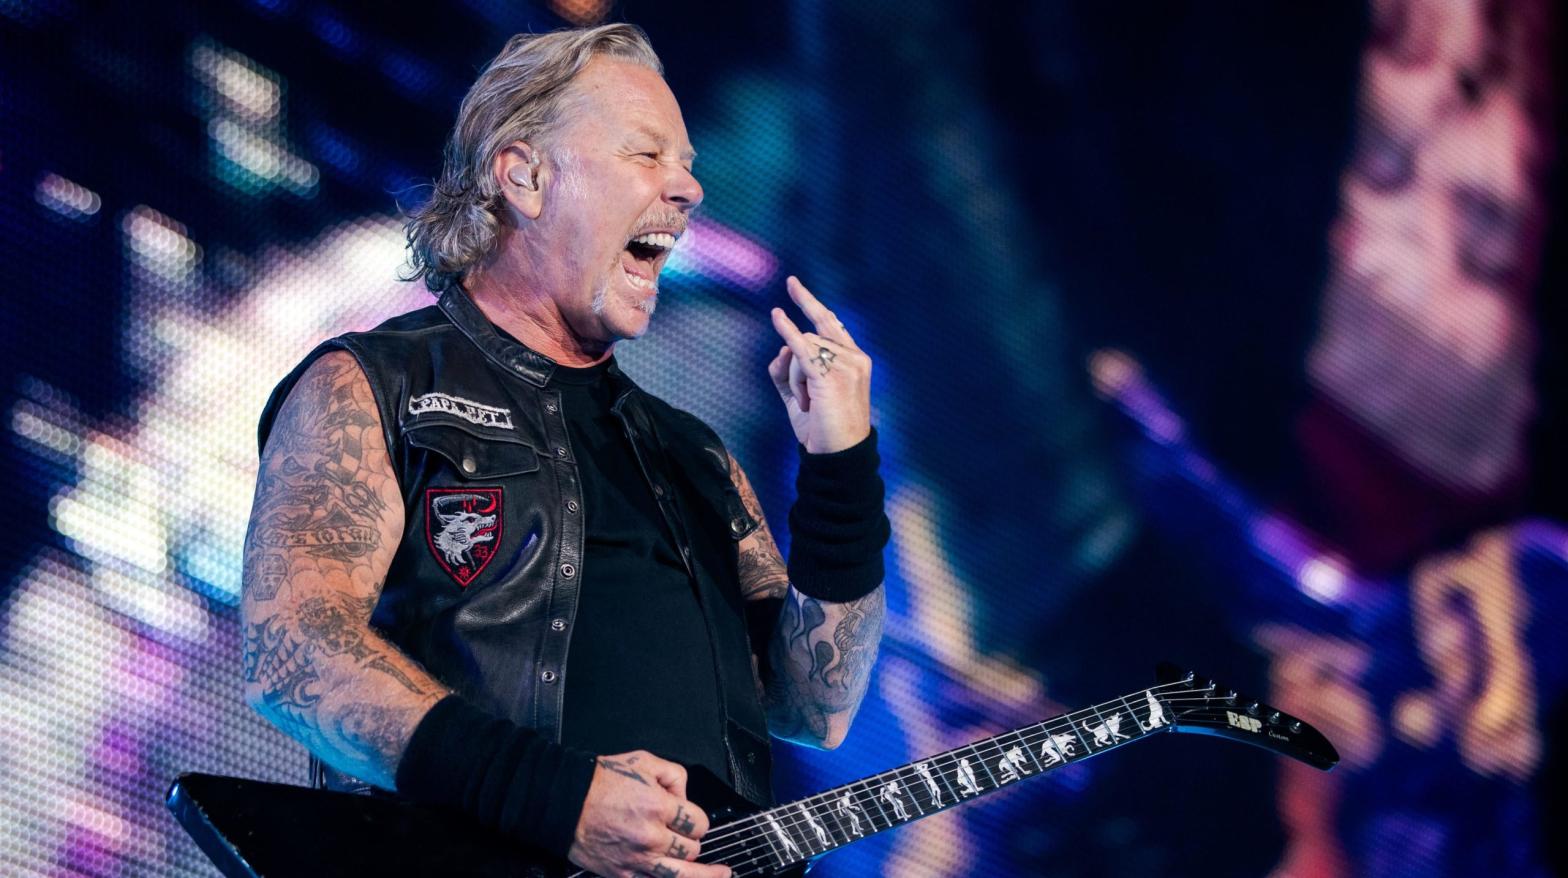 James Hetfield of Metallica performs on stage during a concert at the Ernst-Happel-Stadion in Vienna, Austria on August 16, 2019. (Photo: Georg Hochmuth / AFP, Getty Images)